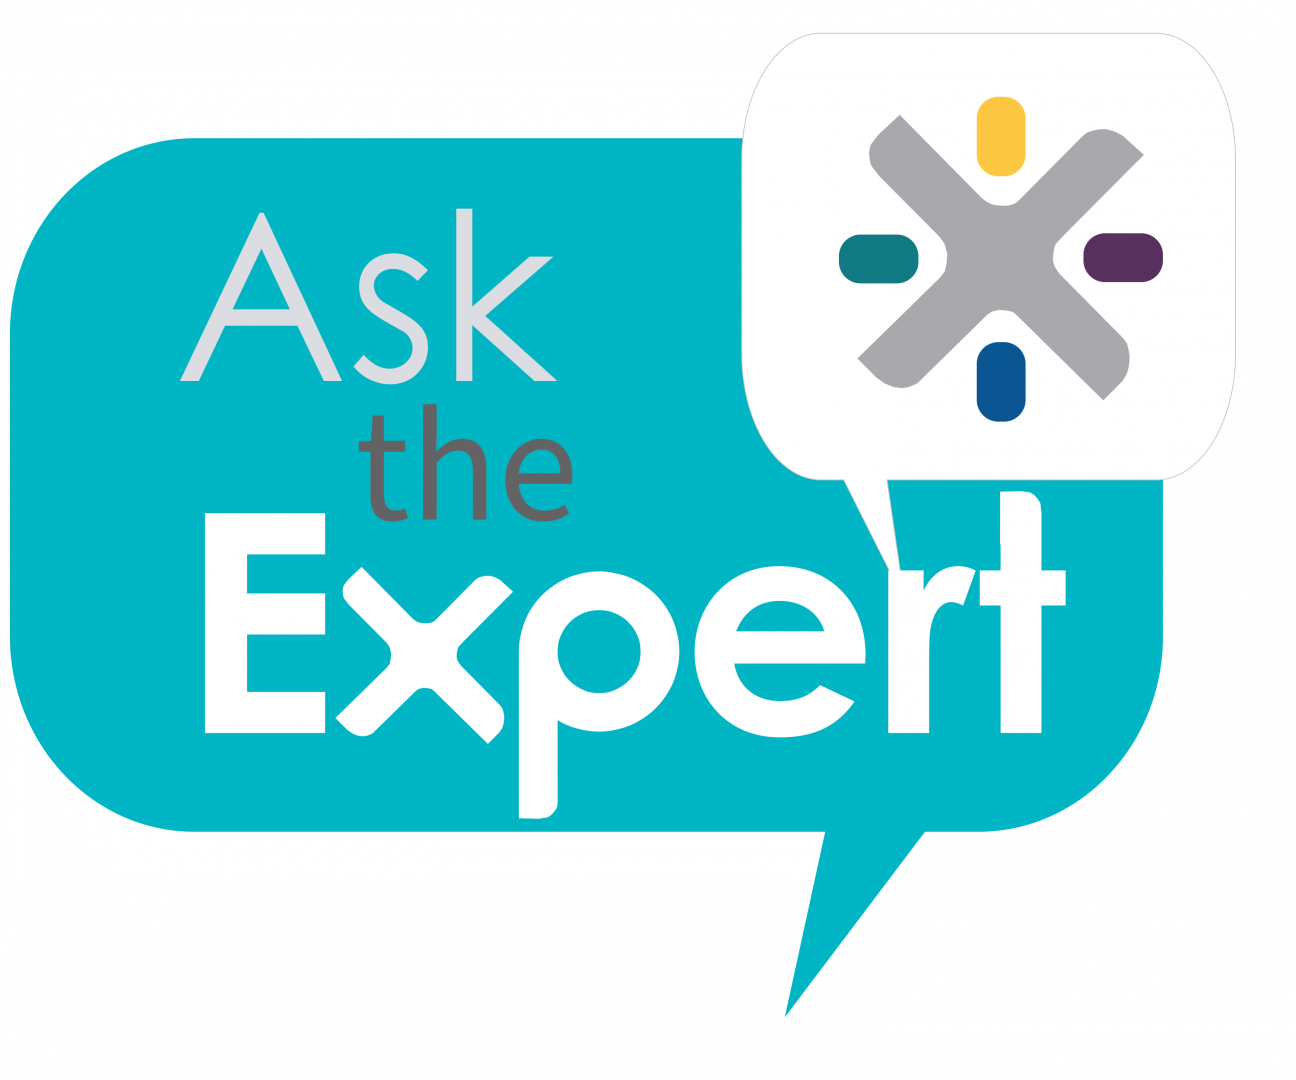 Ask The Expert